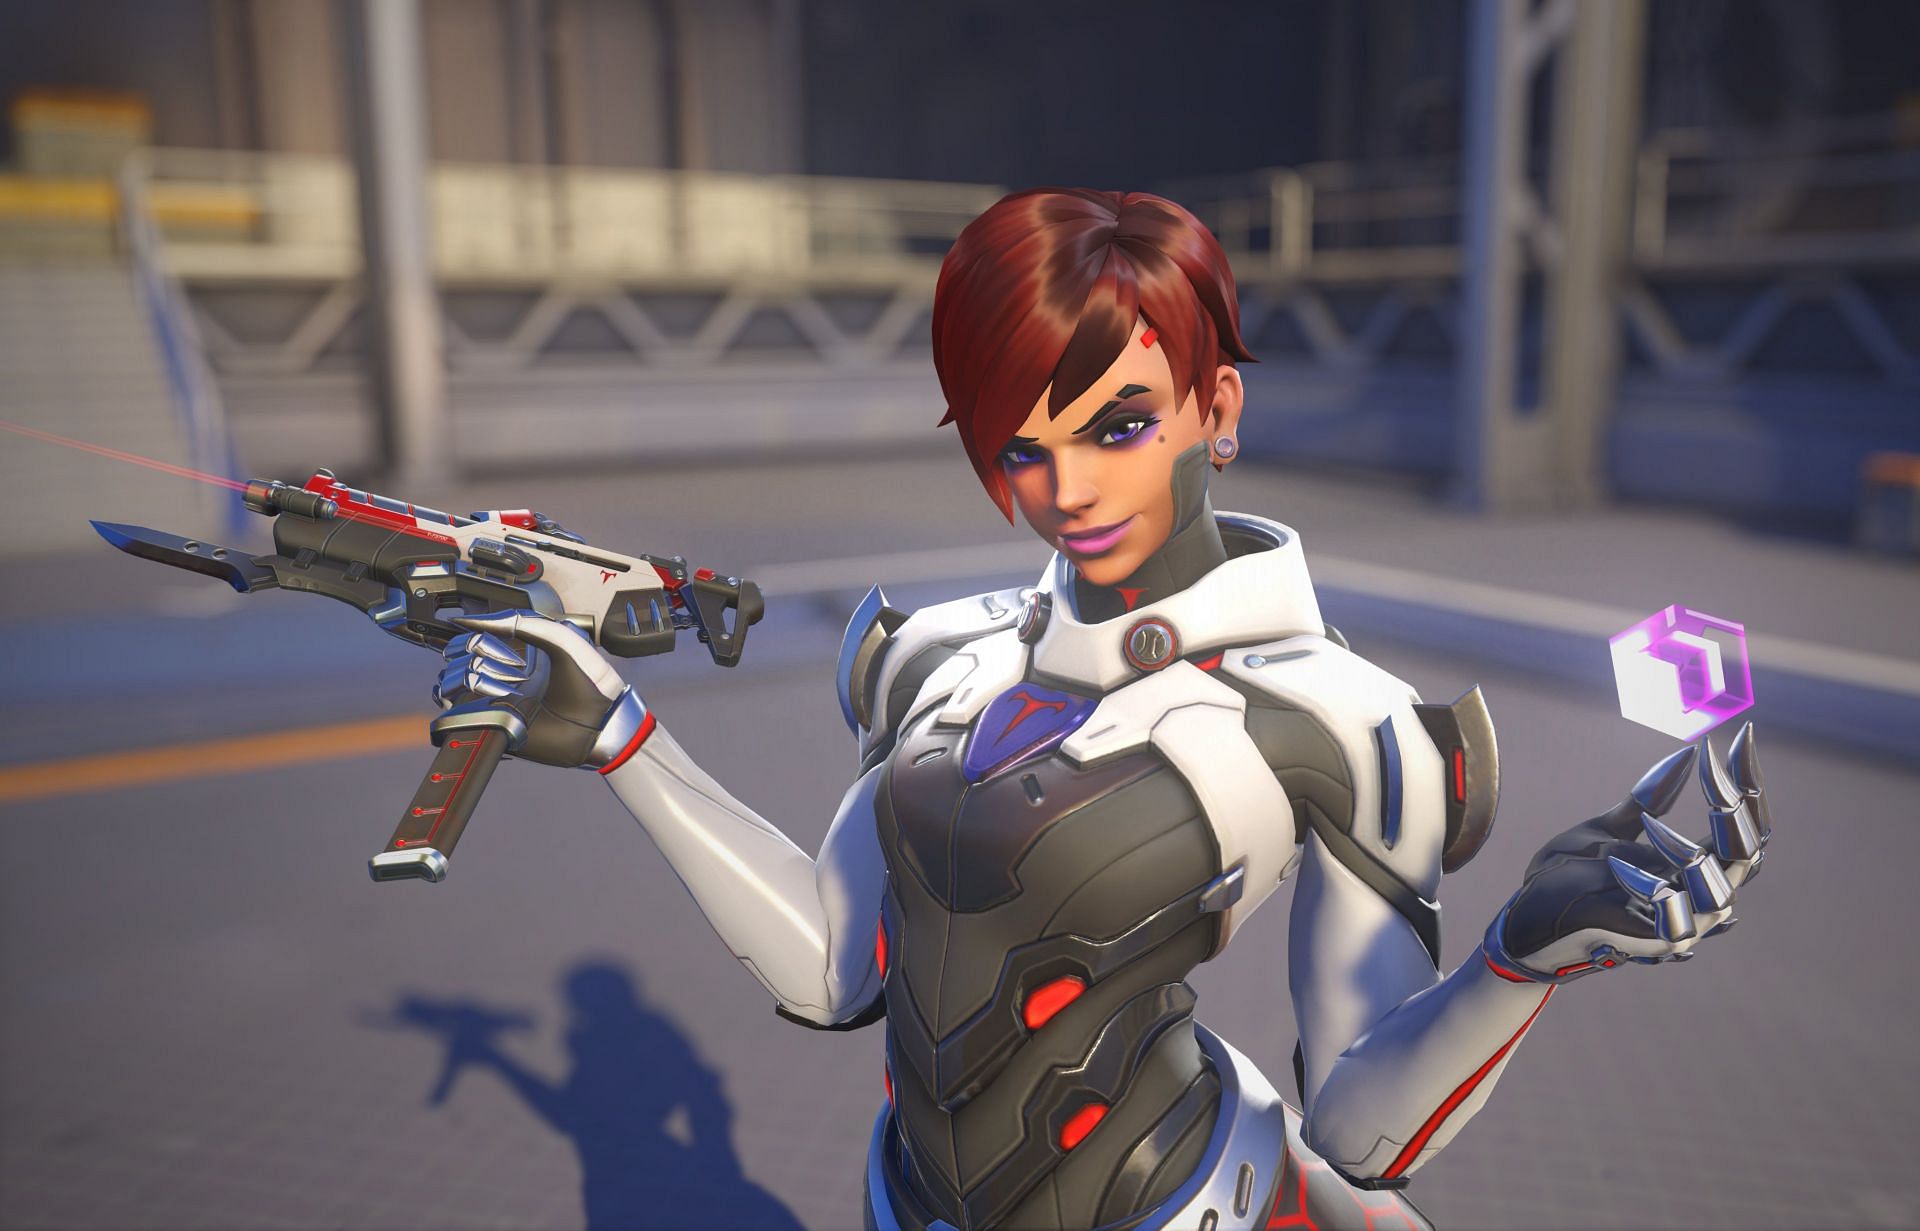 How to get Legendary Talon Sombra skin and more via Twitch Drops (Image via Blizzard Entertainment)